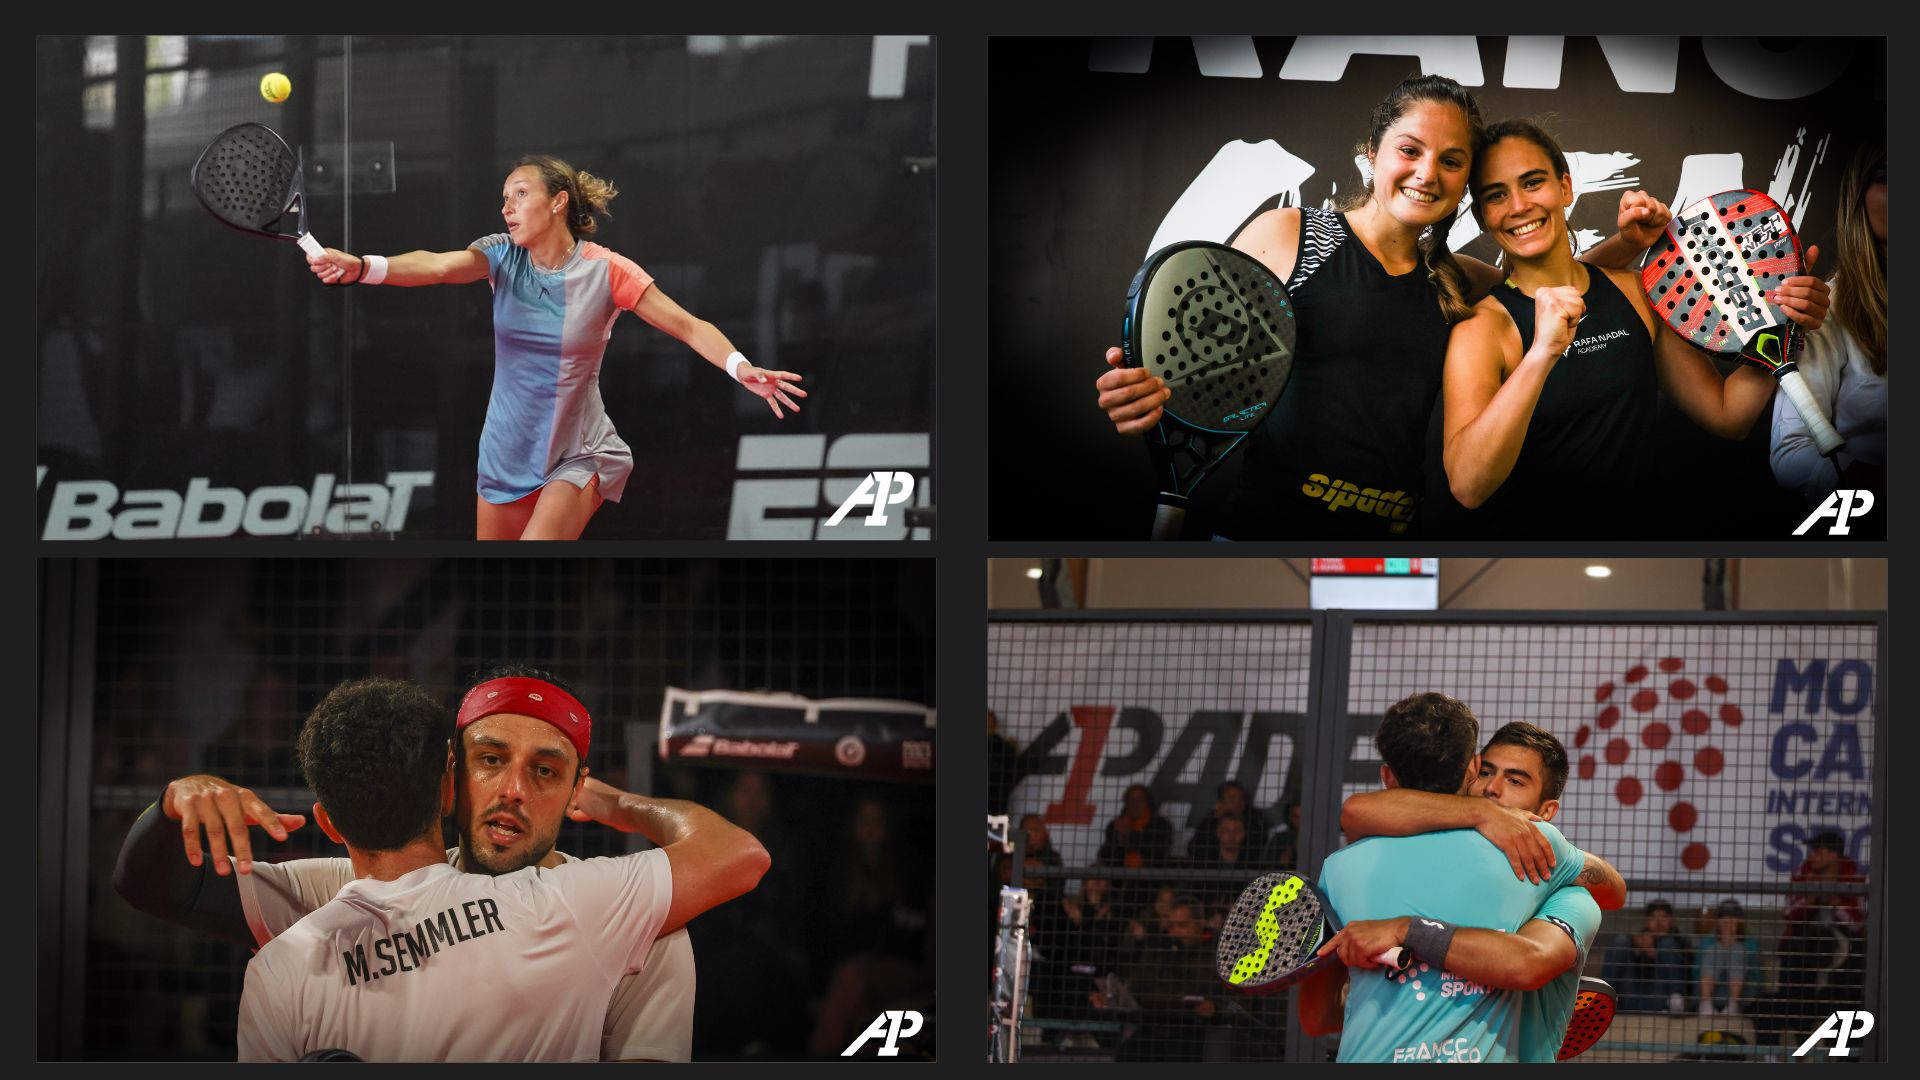 A1Padel France Open: due nuove finali